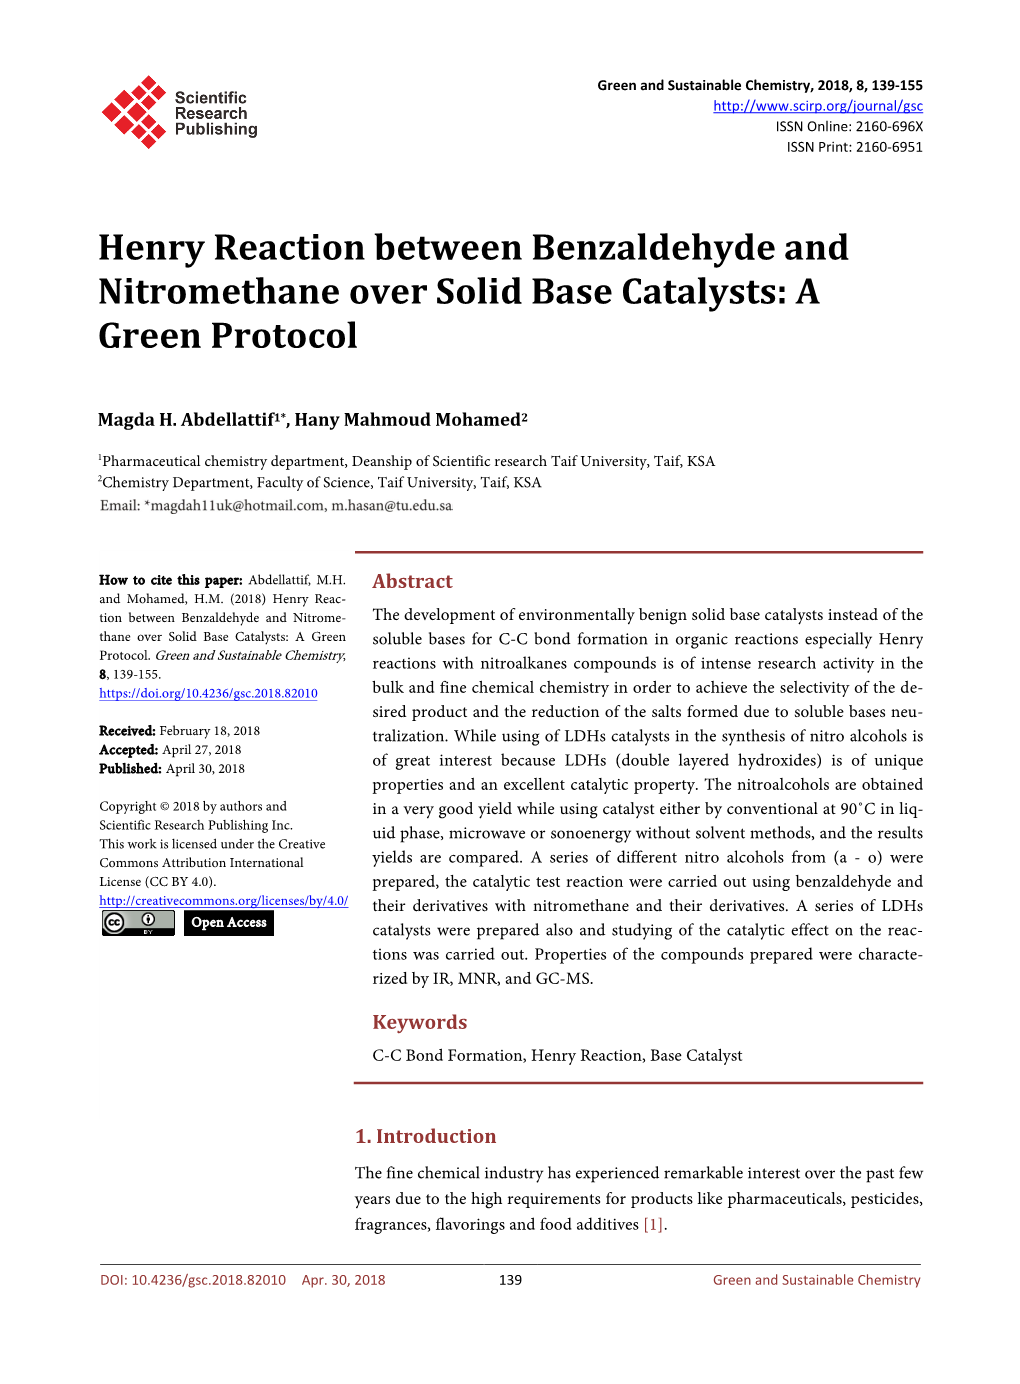 Henry Reaction Between Benzaldehyde and Nitromethane Over Solid Base Catalysts: a Green Protocol